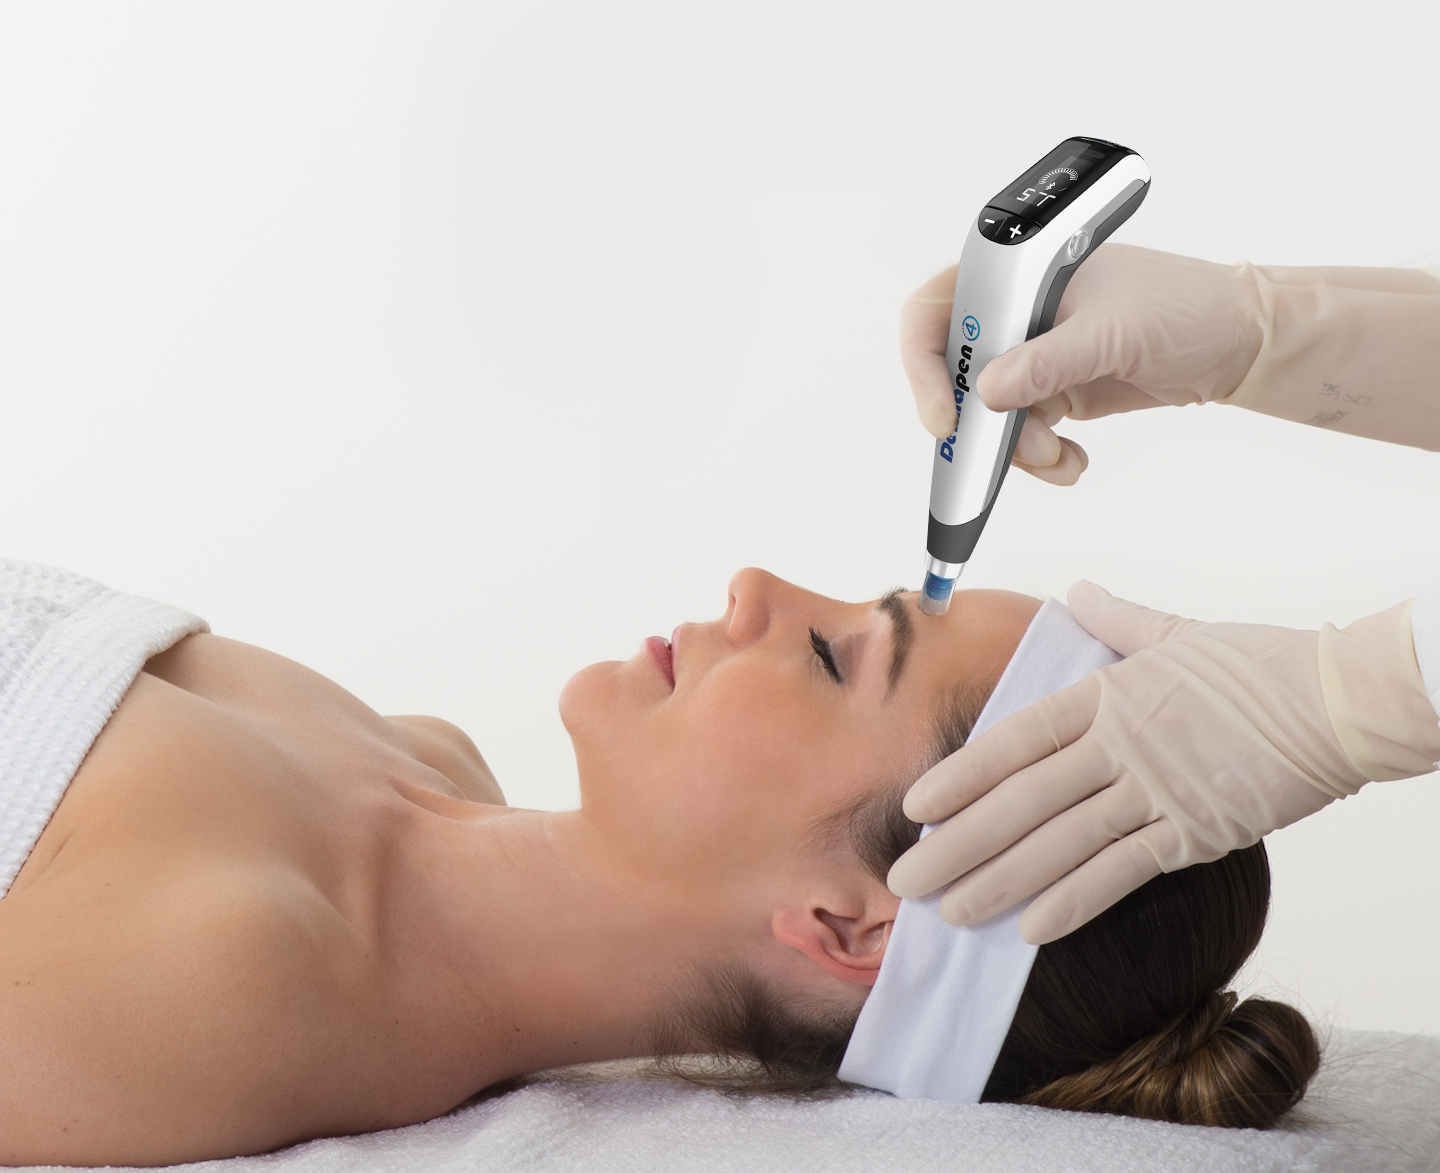 Are Micro-Needling And Microdermabrasion The Same?